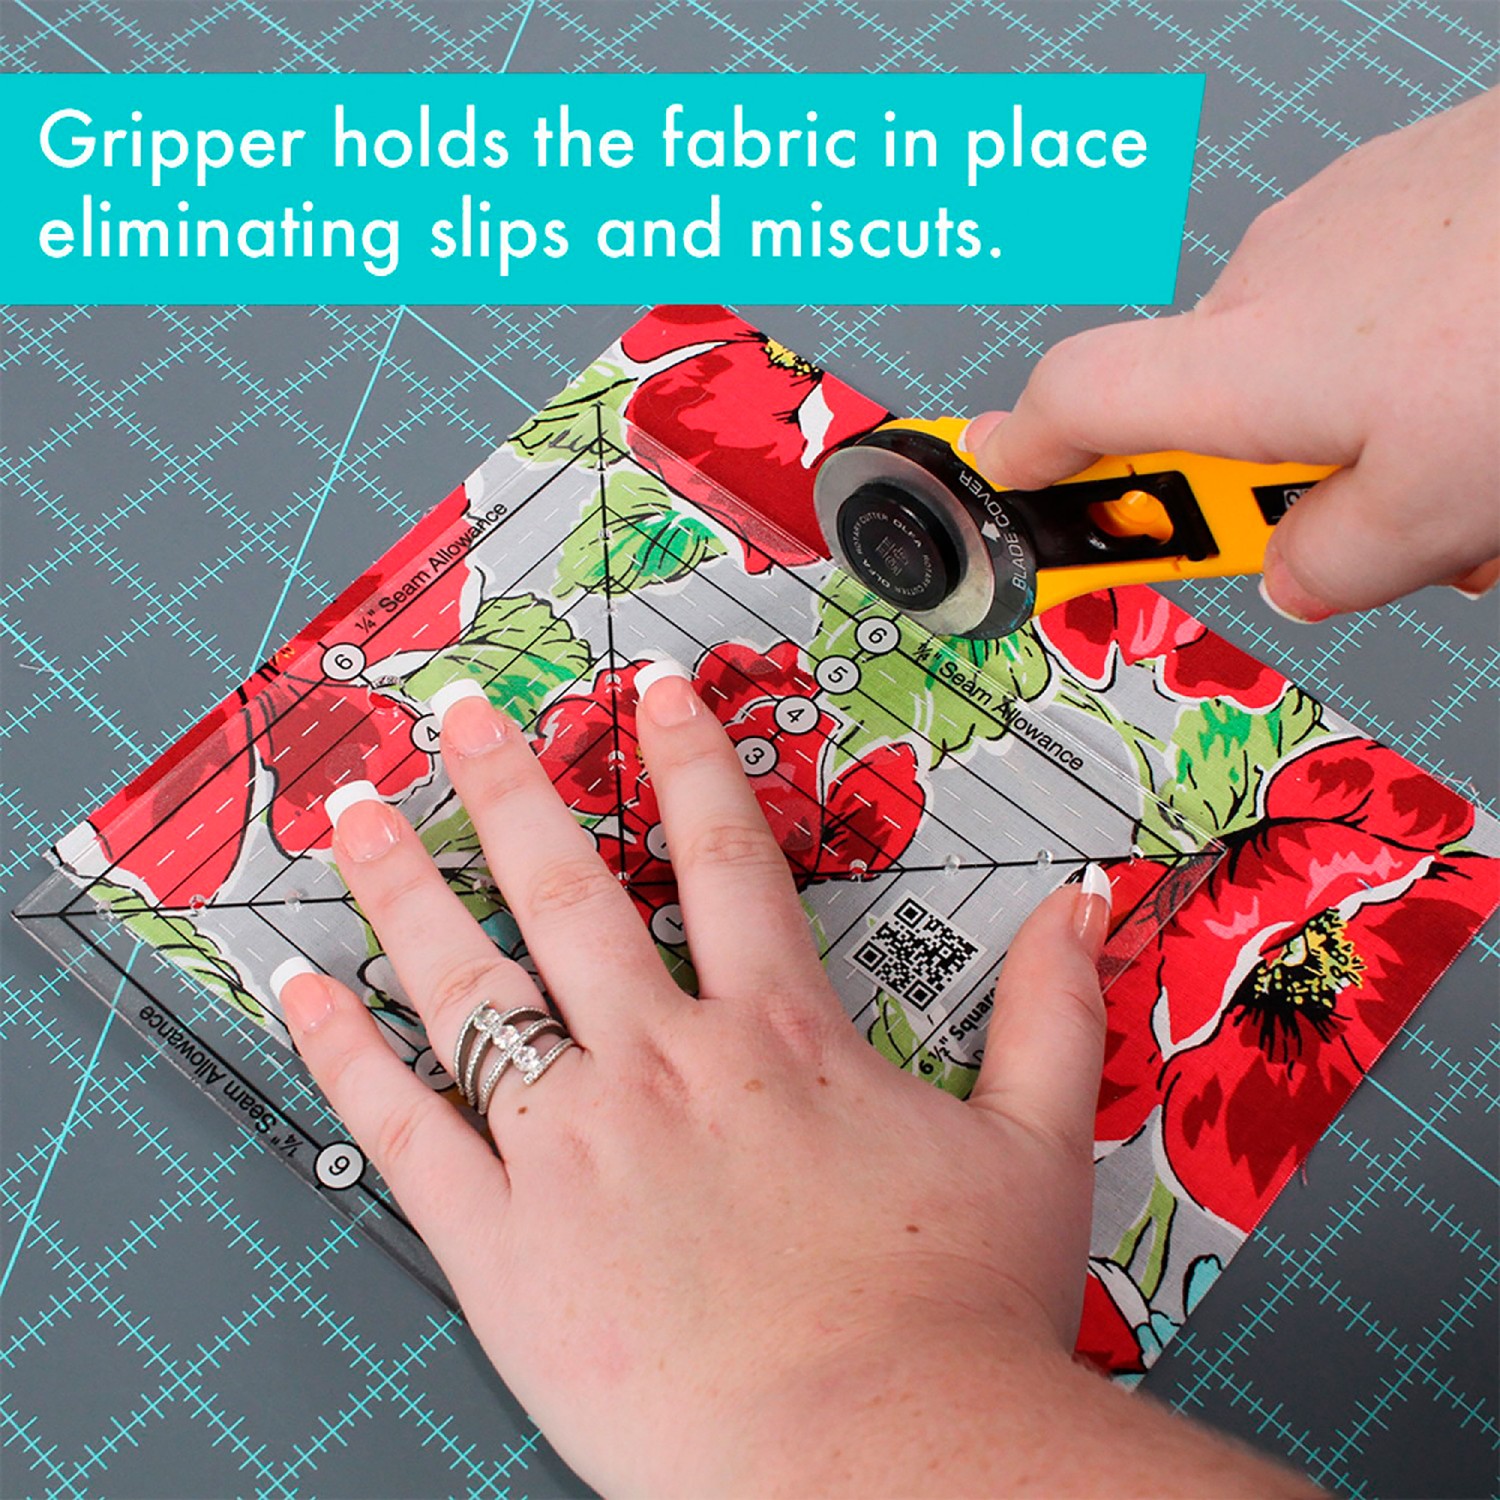 Creative Grids - 6-1/2in Square It Up or Fussy Cut Square Quilt Ruler